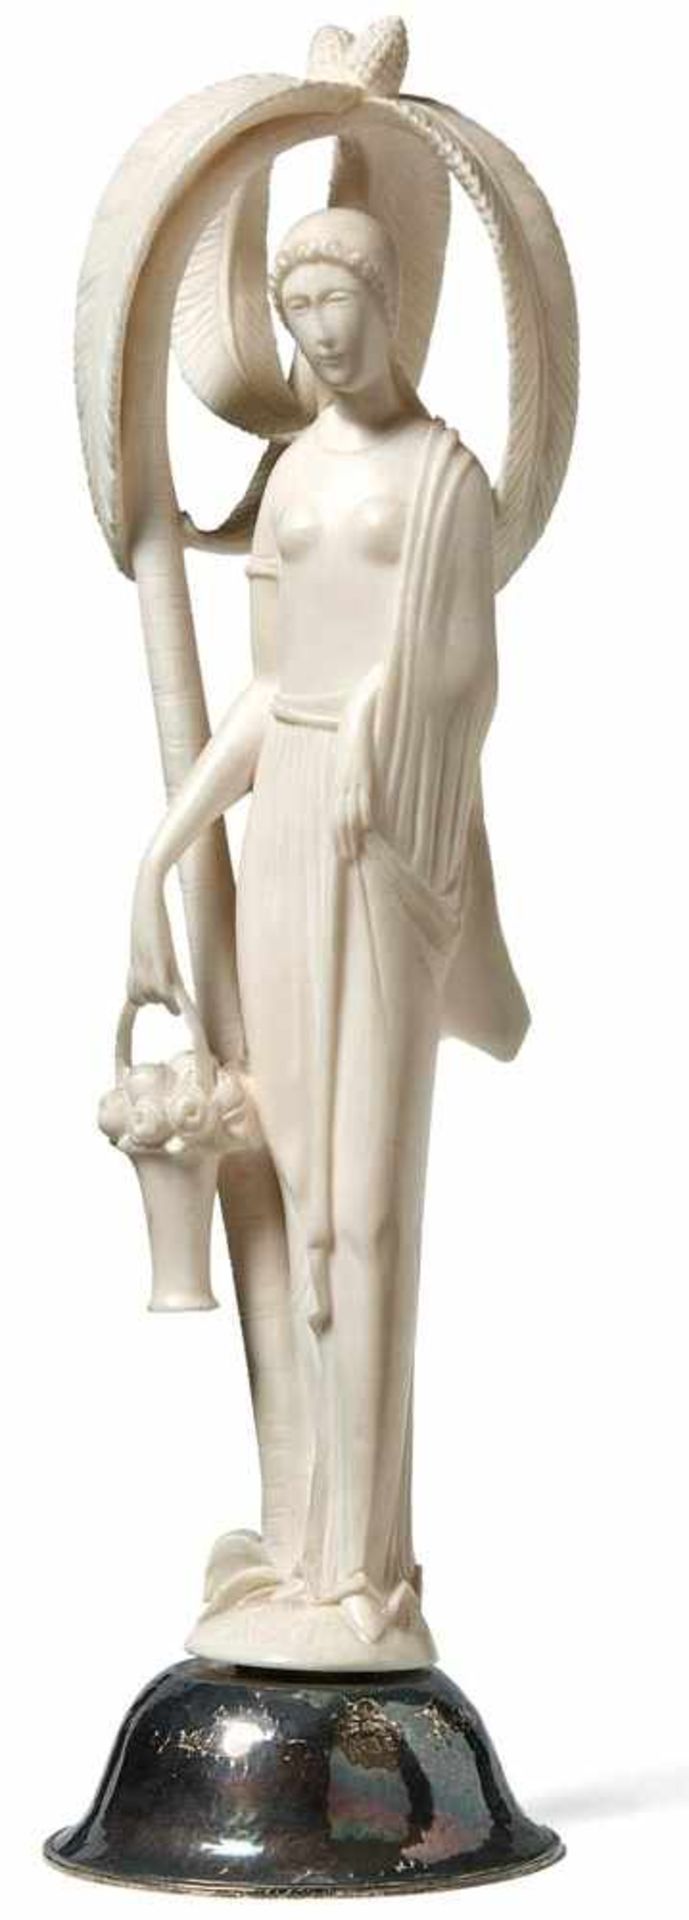 Ivory figureProbably Erbach, 1920sYoung woman standing under a palm tree with flower basket.